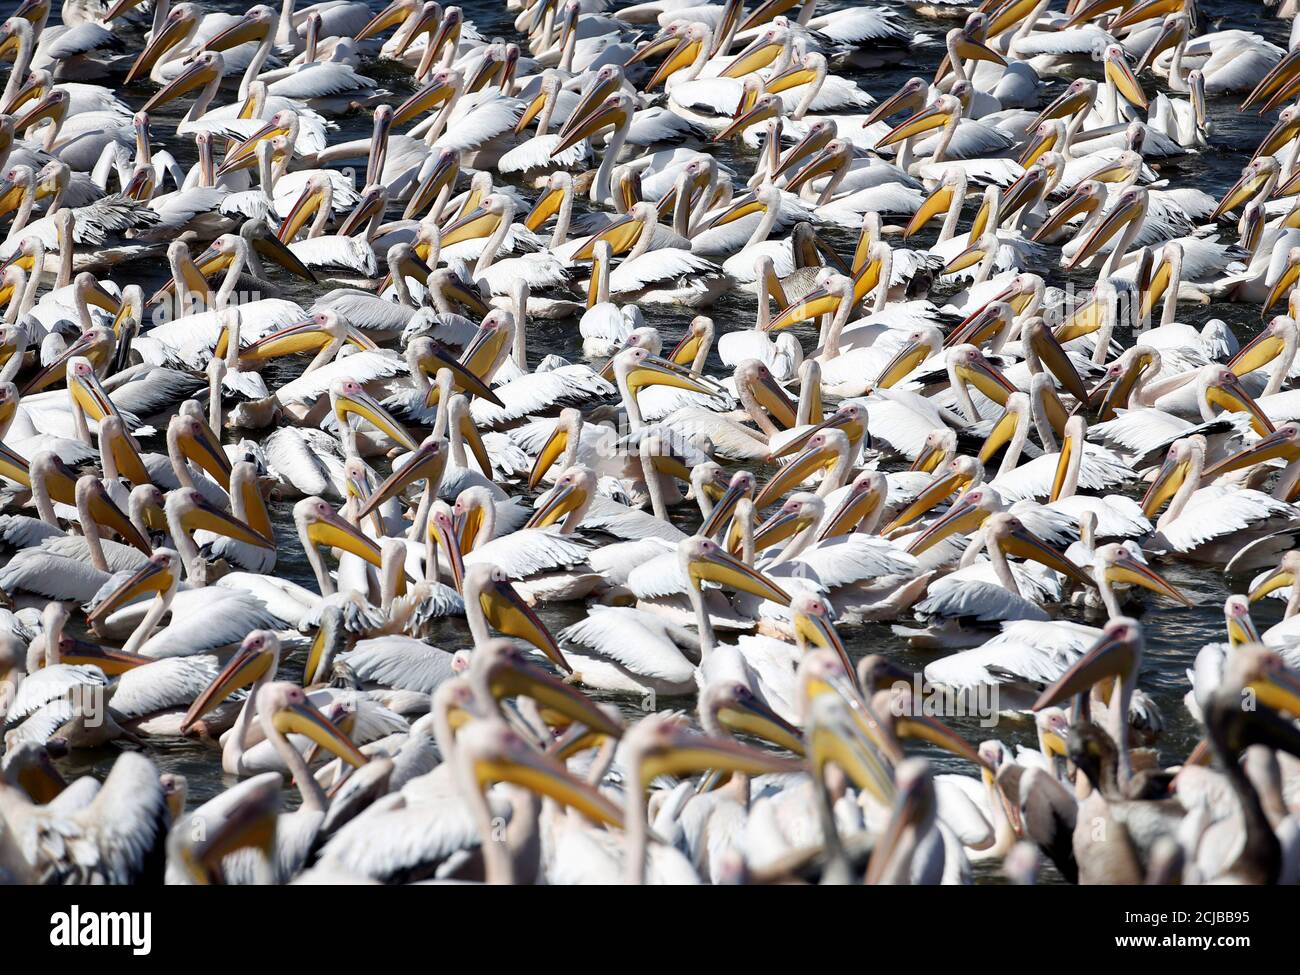 Great white pelicans stand in the water as they are fed by employees from Israel's nature and parks authority, during their migrating season, in Mishmar Hasharon, central Israel October 13, 2016. REUTERS/Baz Ratner Stock Photo